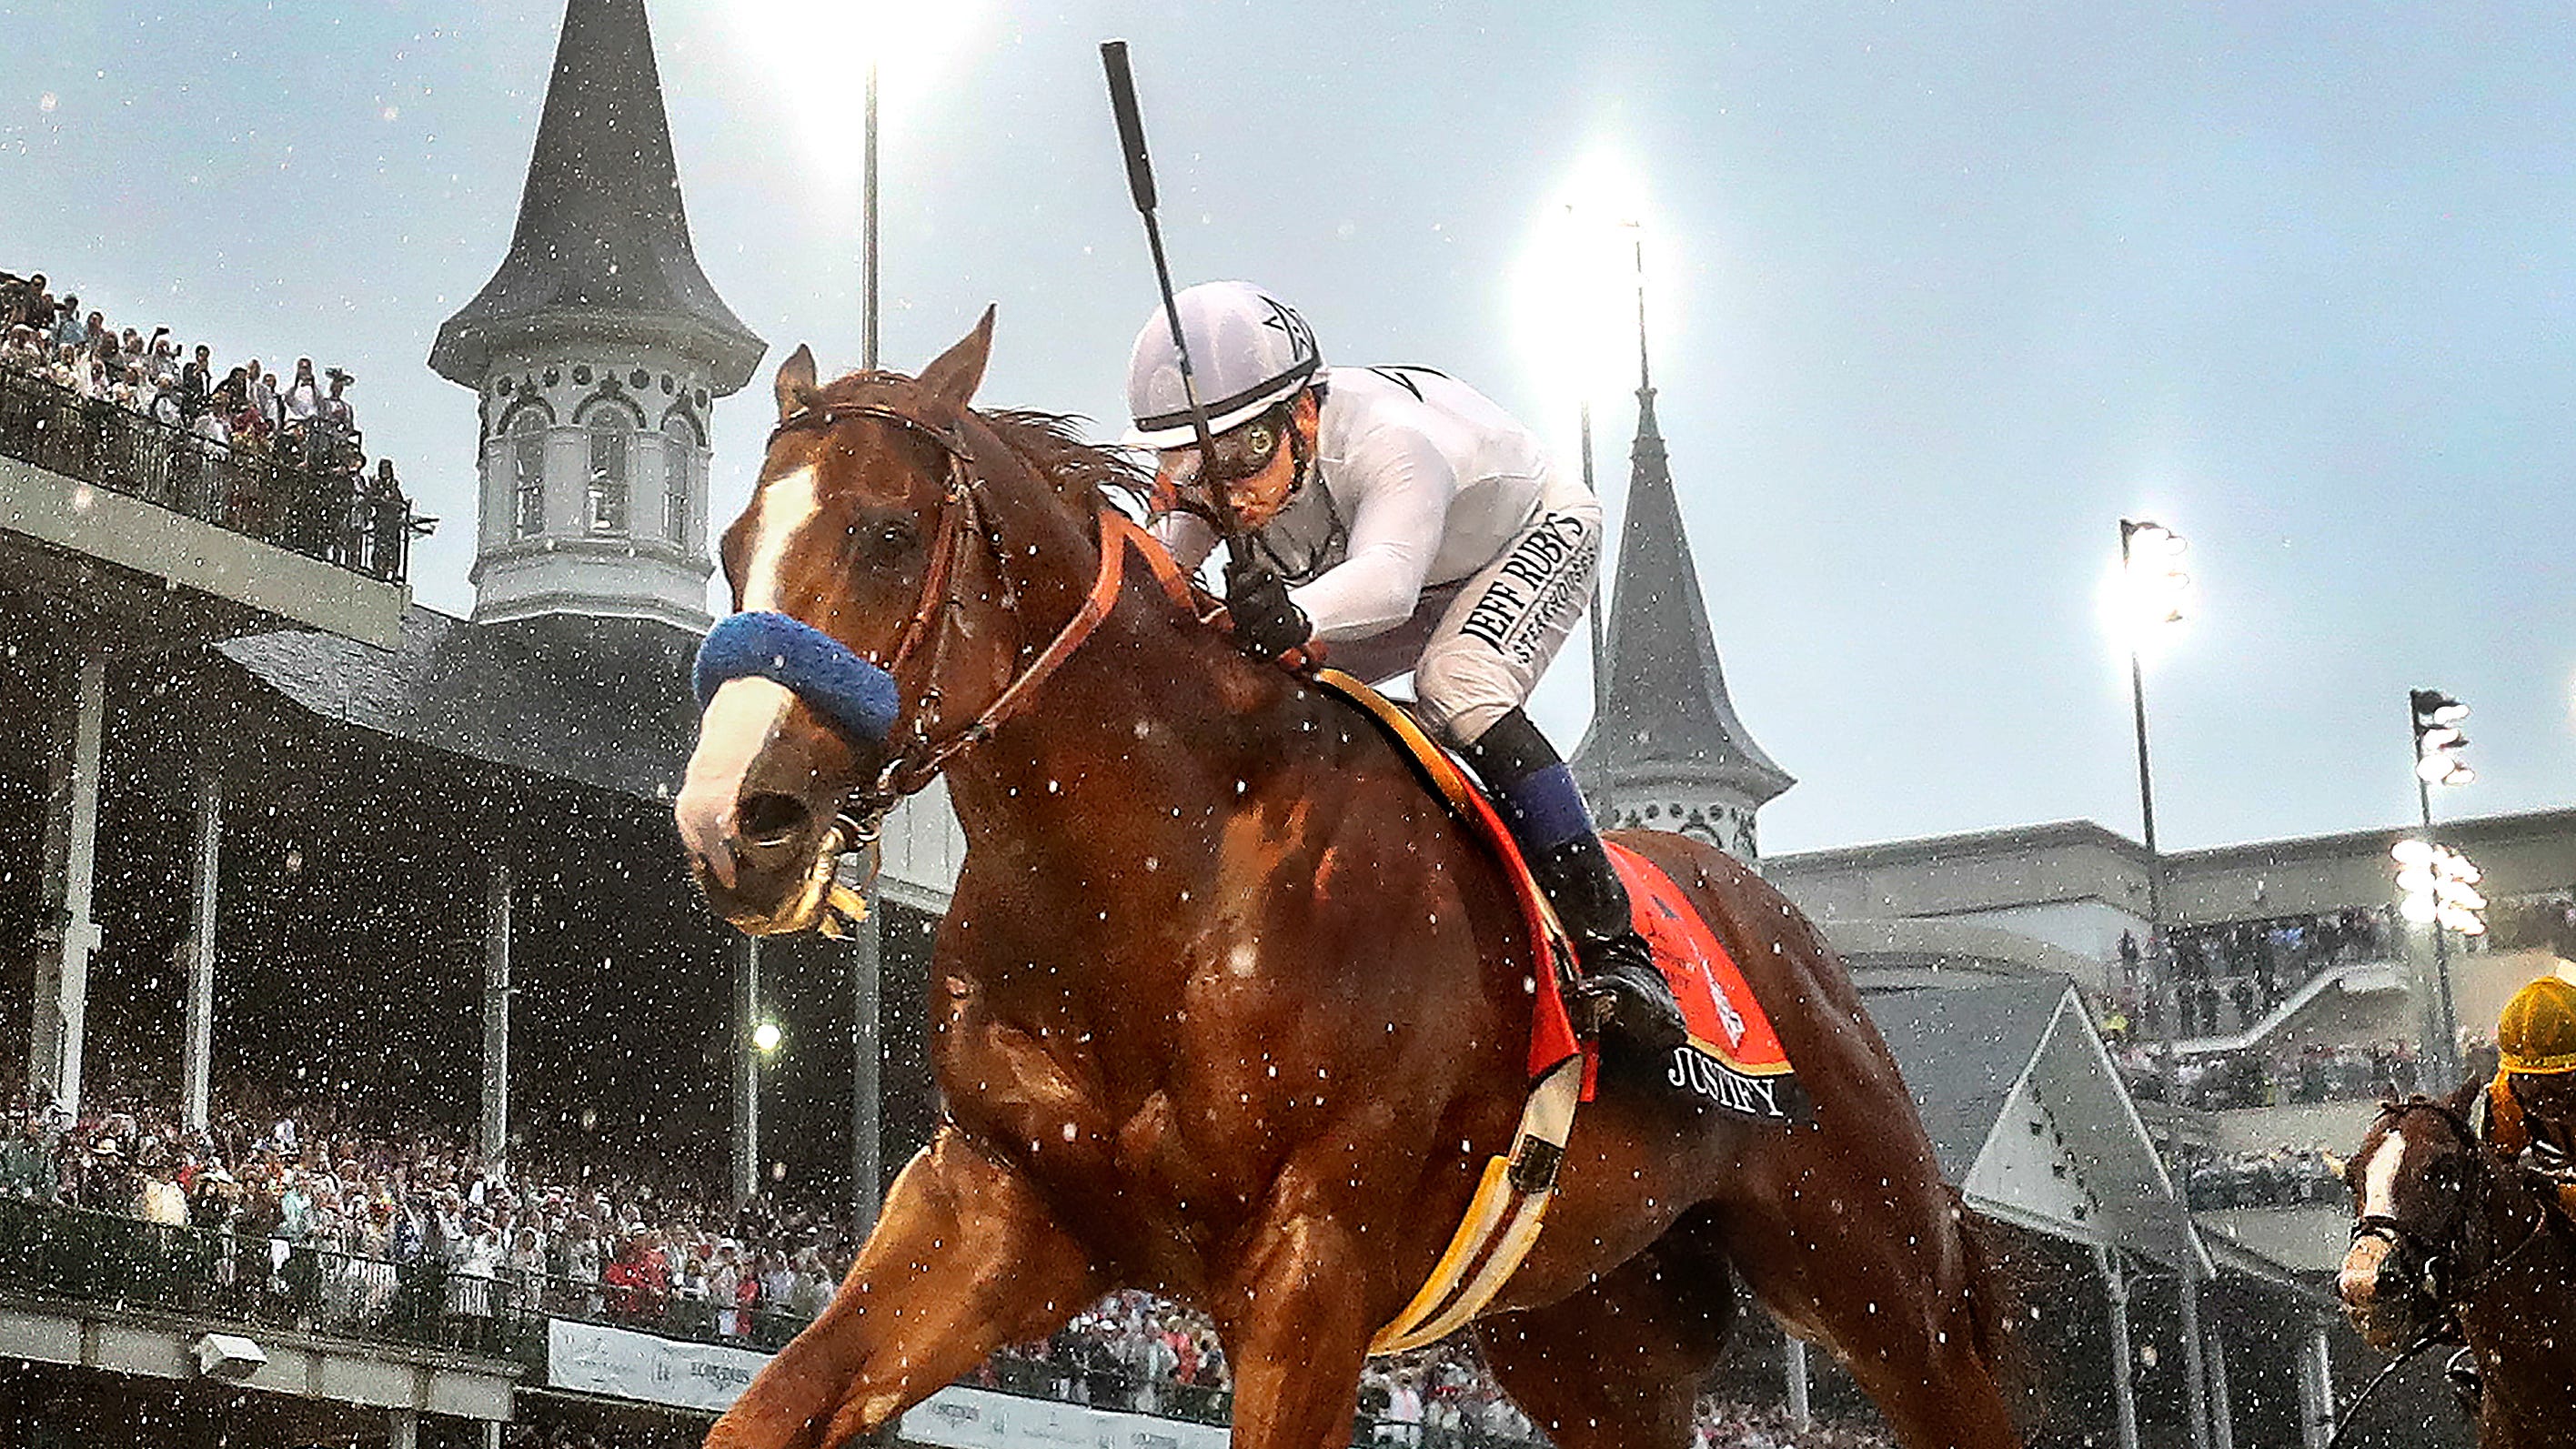 Kentucky Derby winner Justify caught in scandal What to know